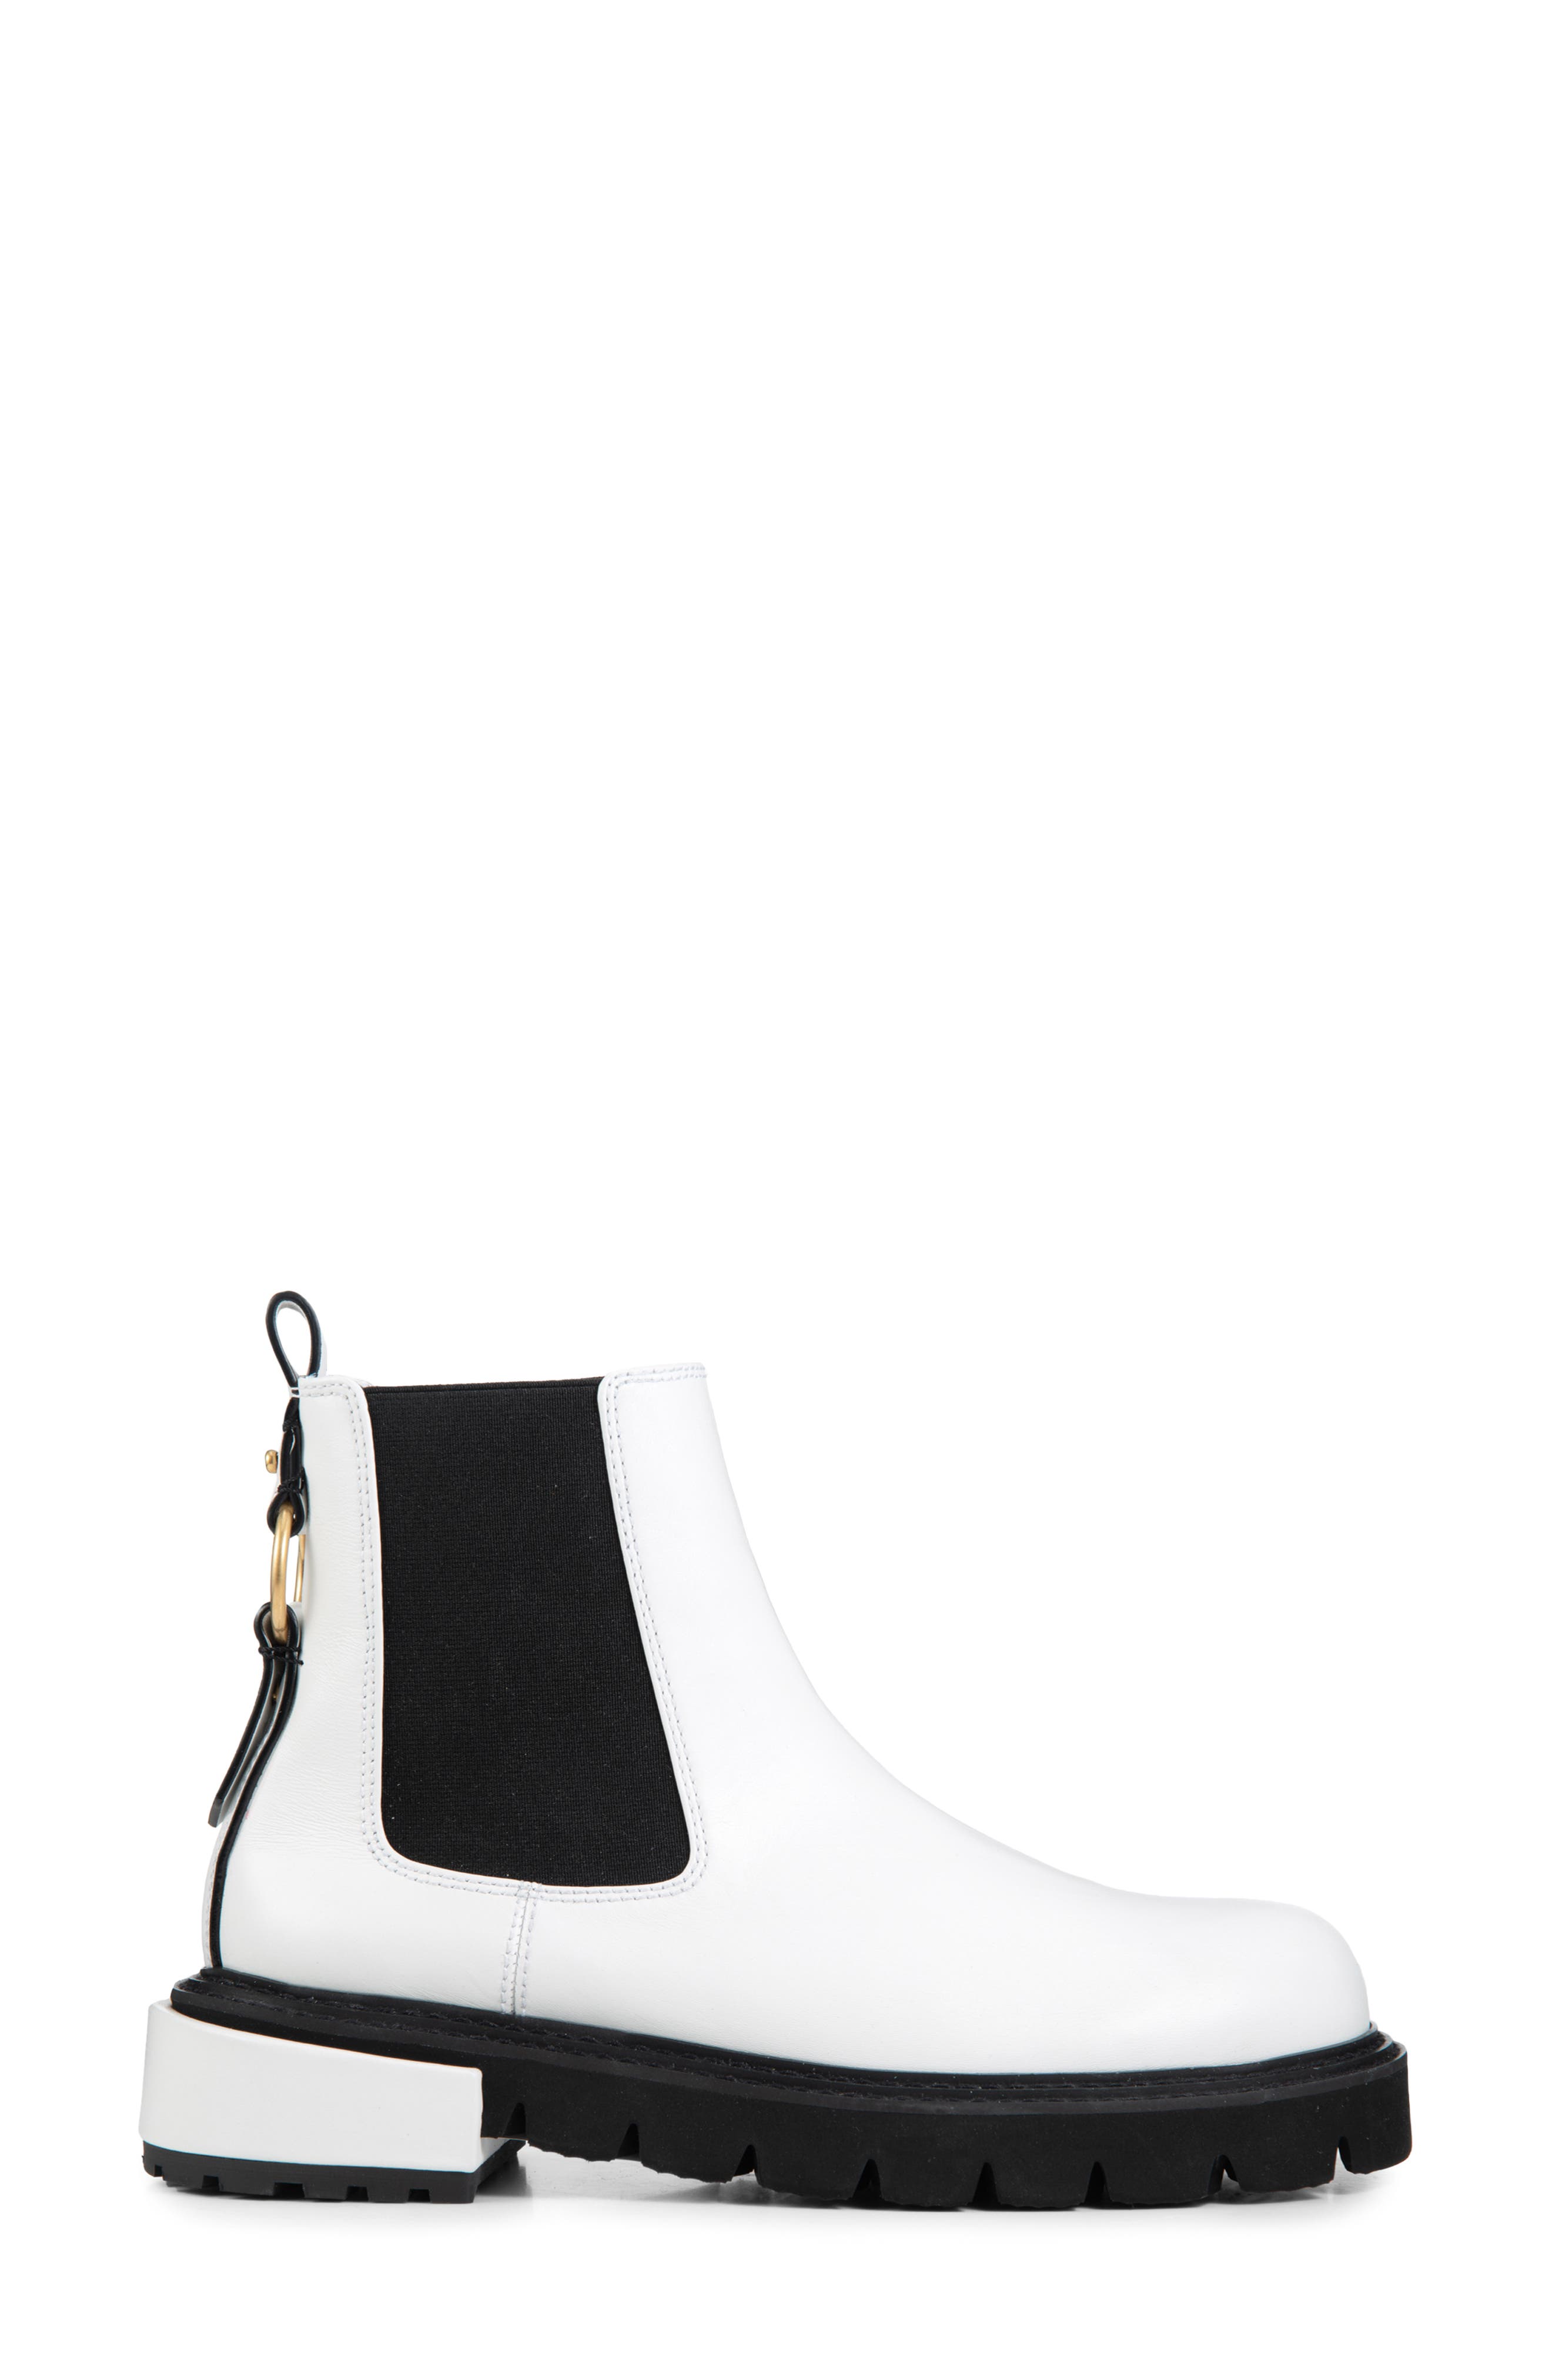 White Booties \u0026 Ankle Boots | Nordstrom